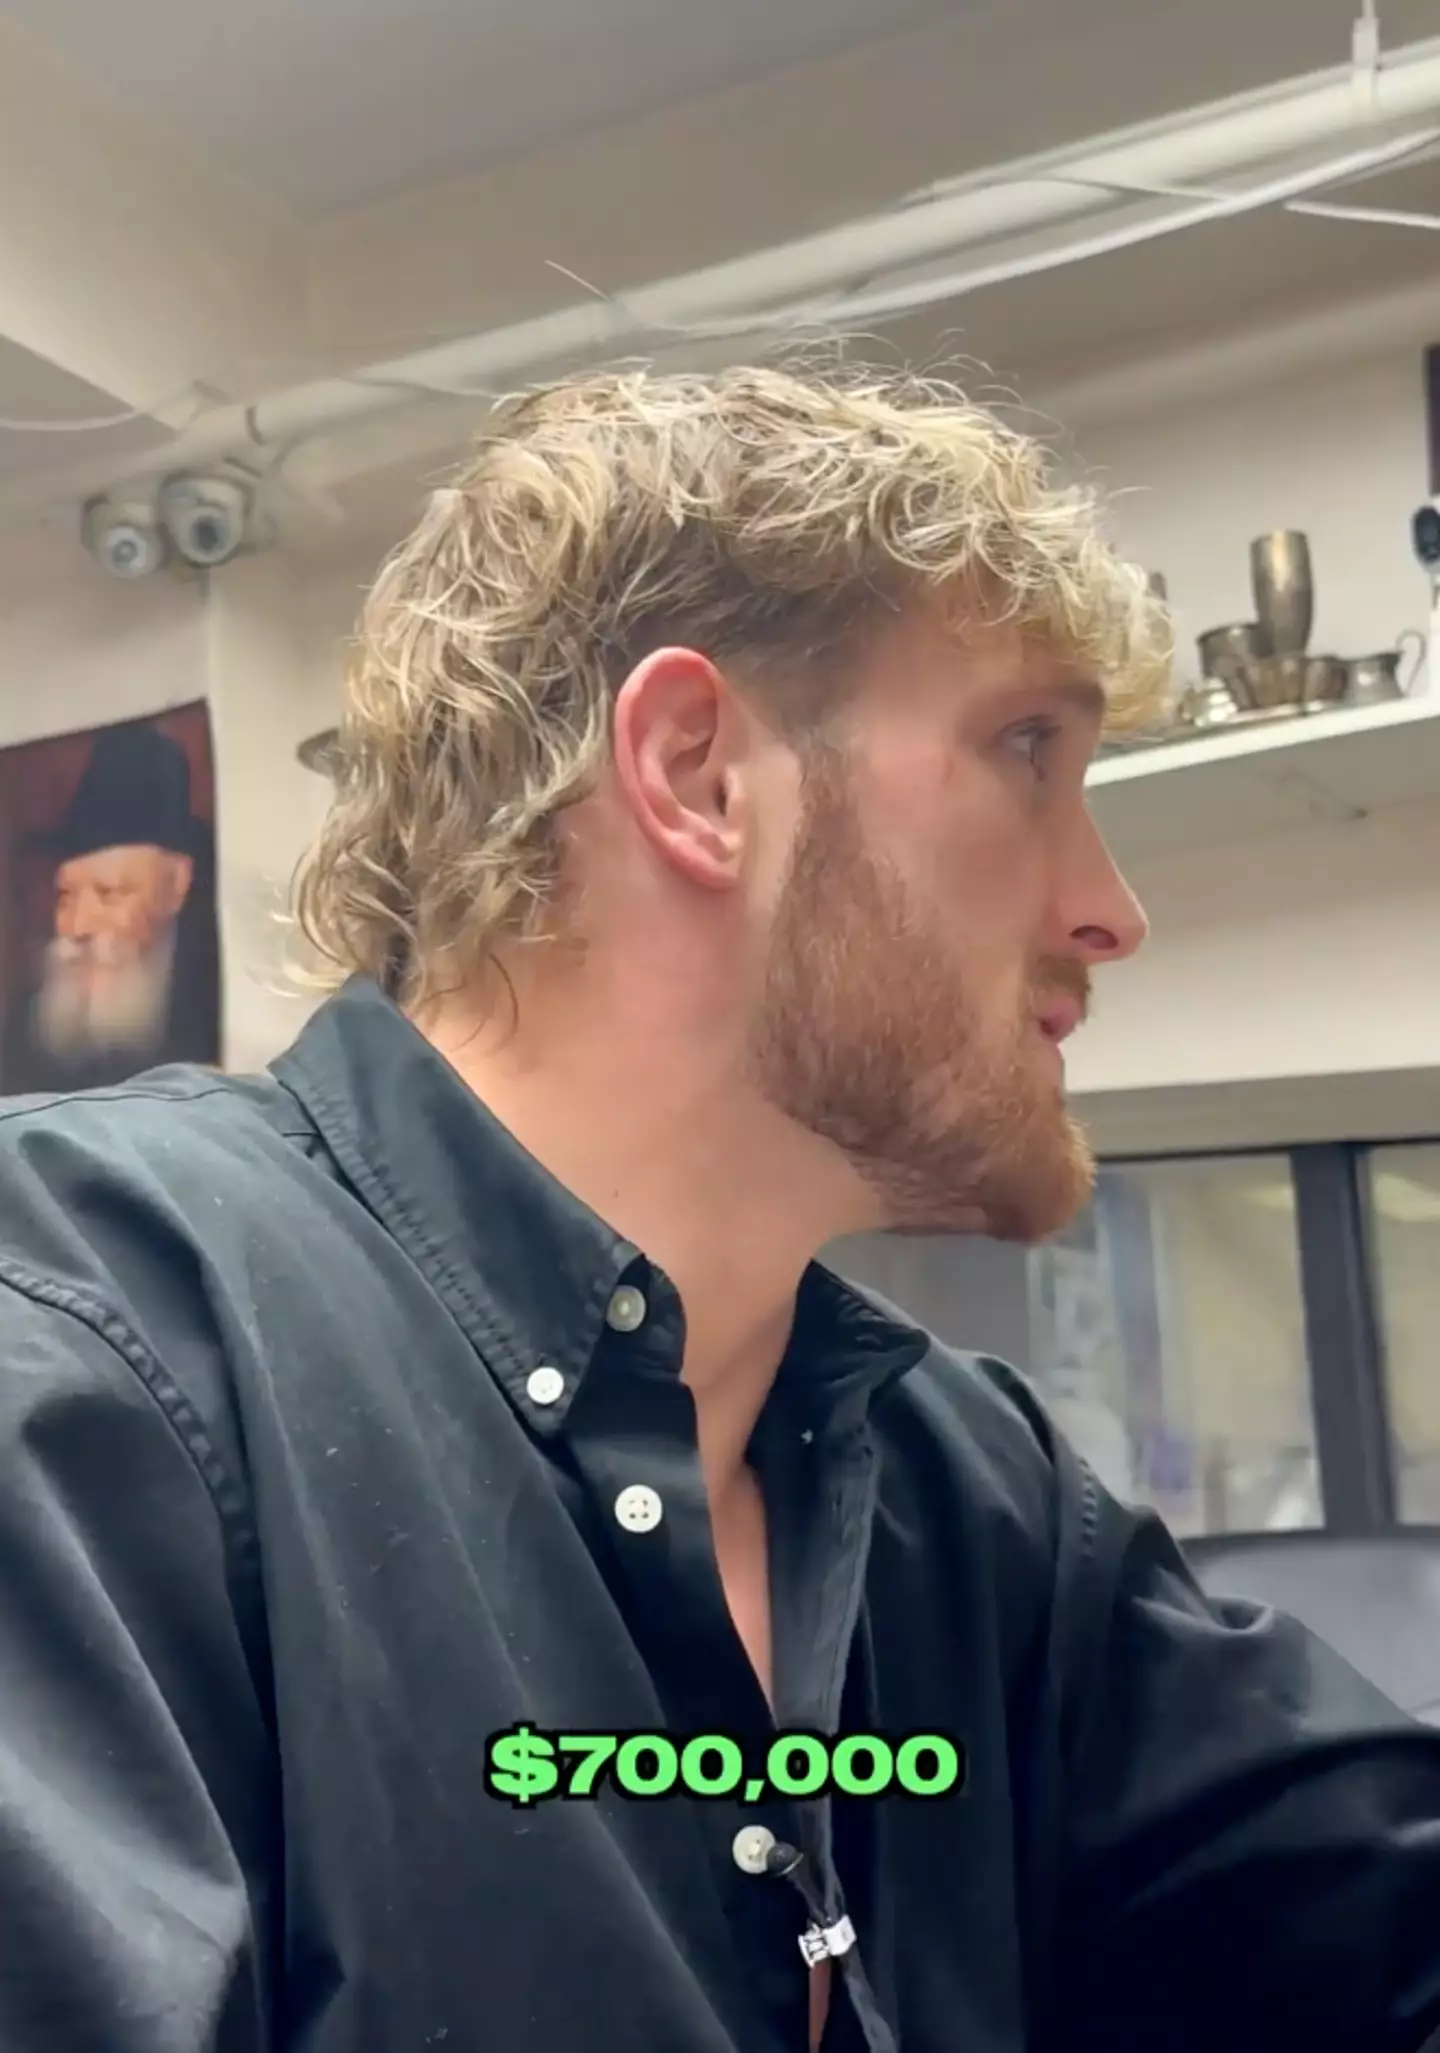 Logan Paul was certainly not happy with the offer.